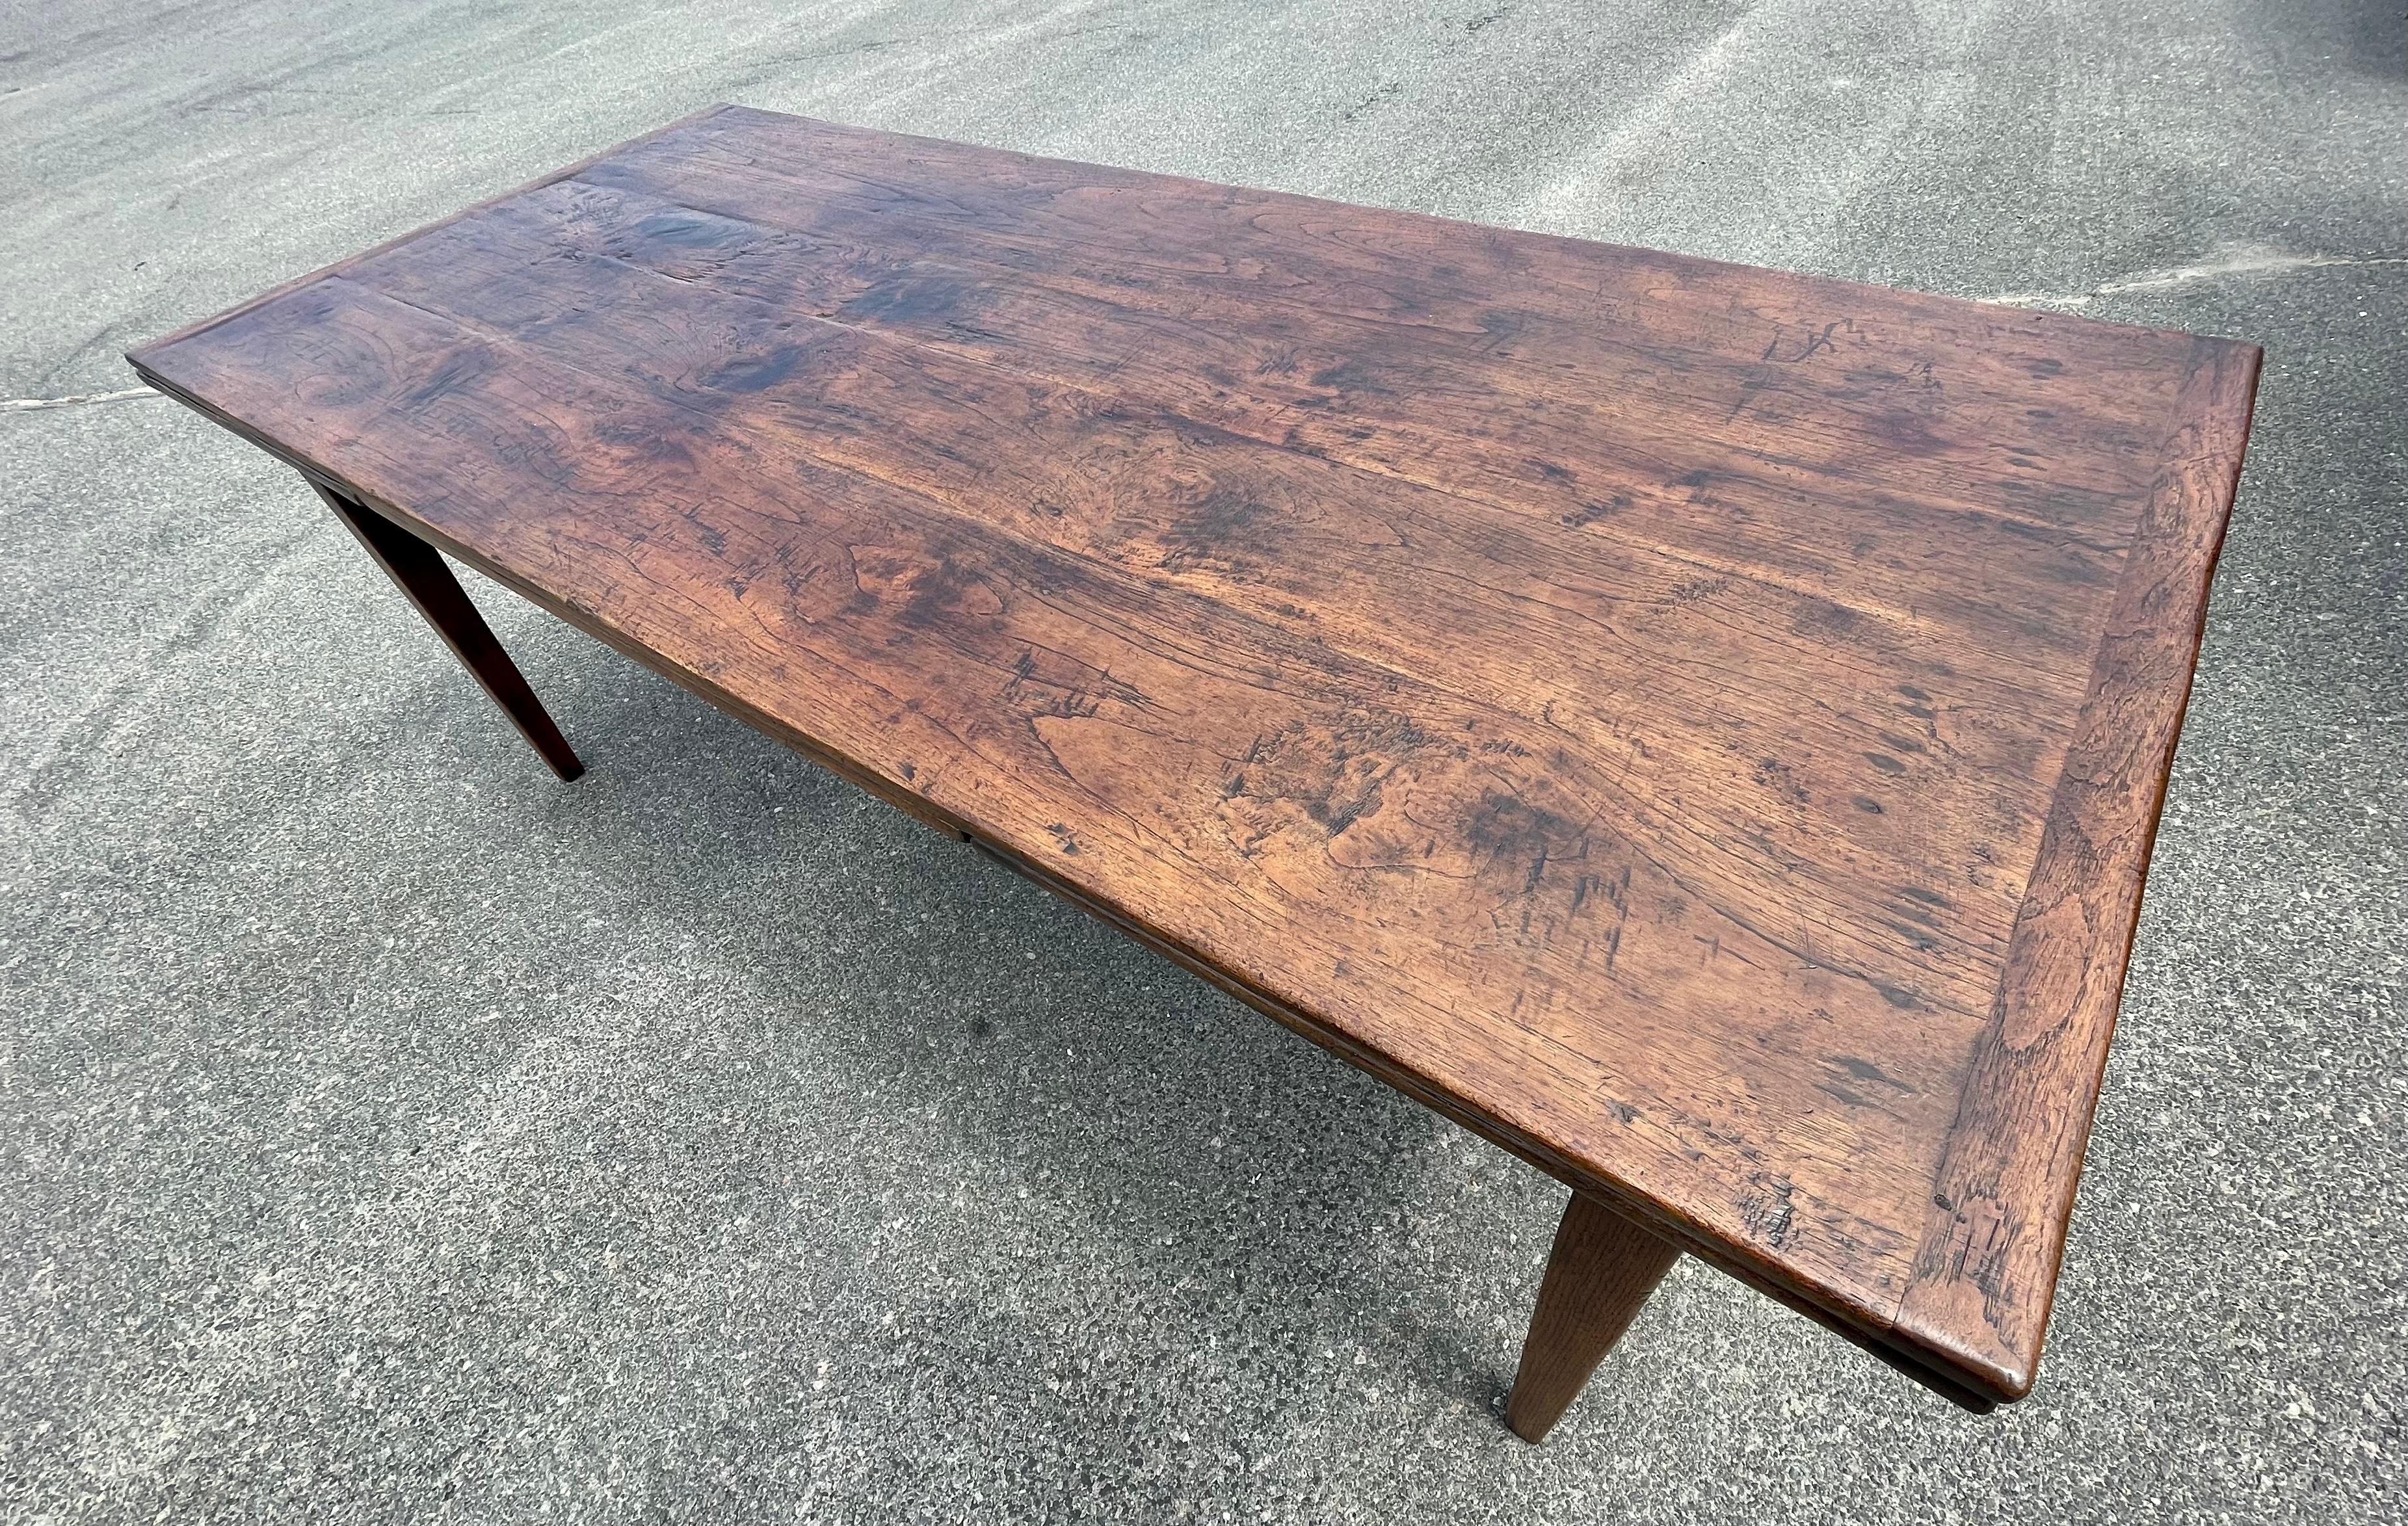 Chestnut draw leaf table with rich oaky colored top and nice figuring, on taper legs.  Extends to 131 inches when open.